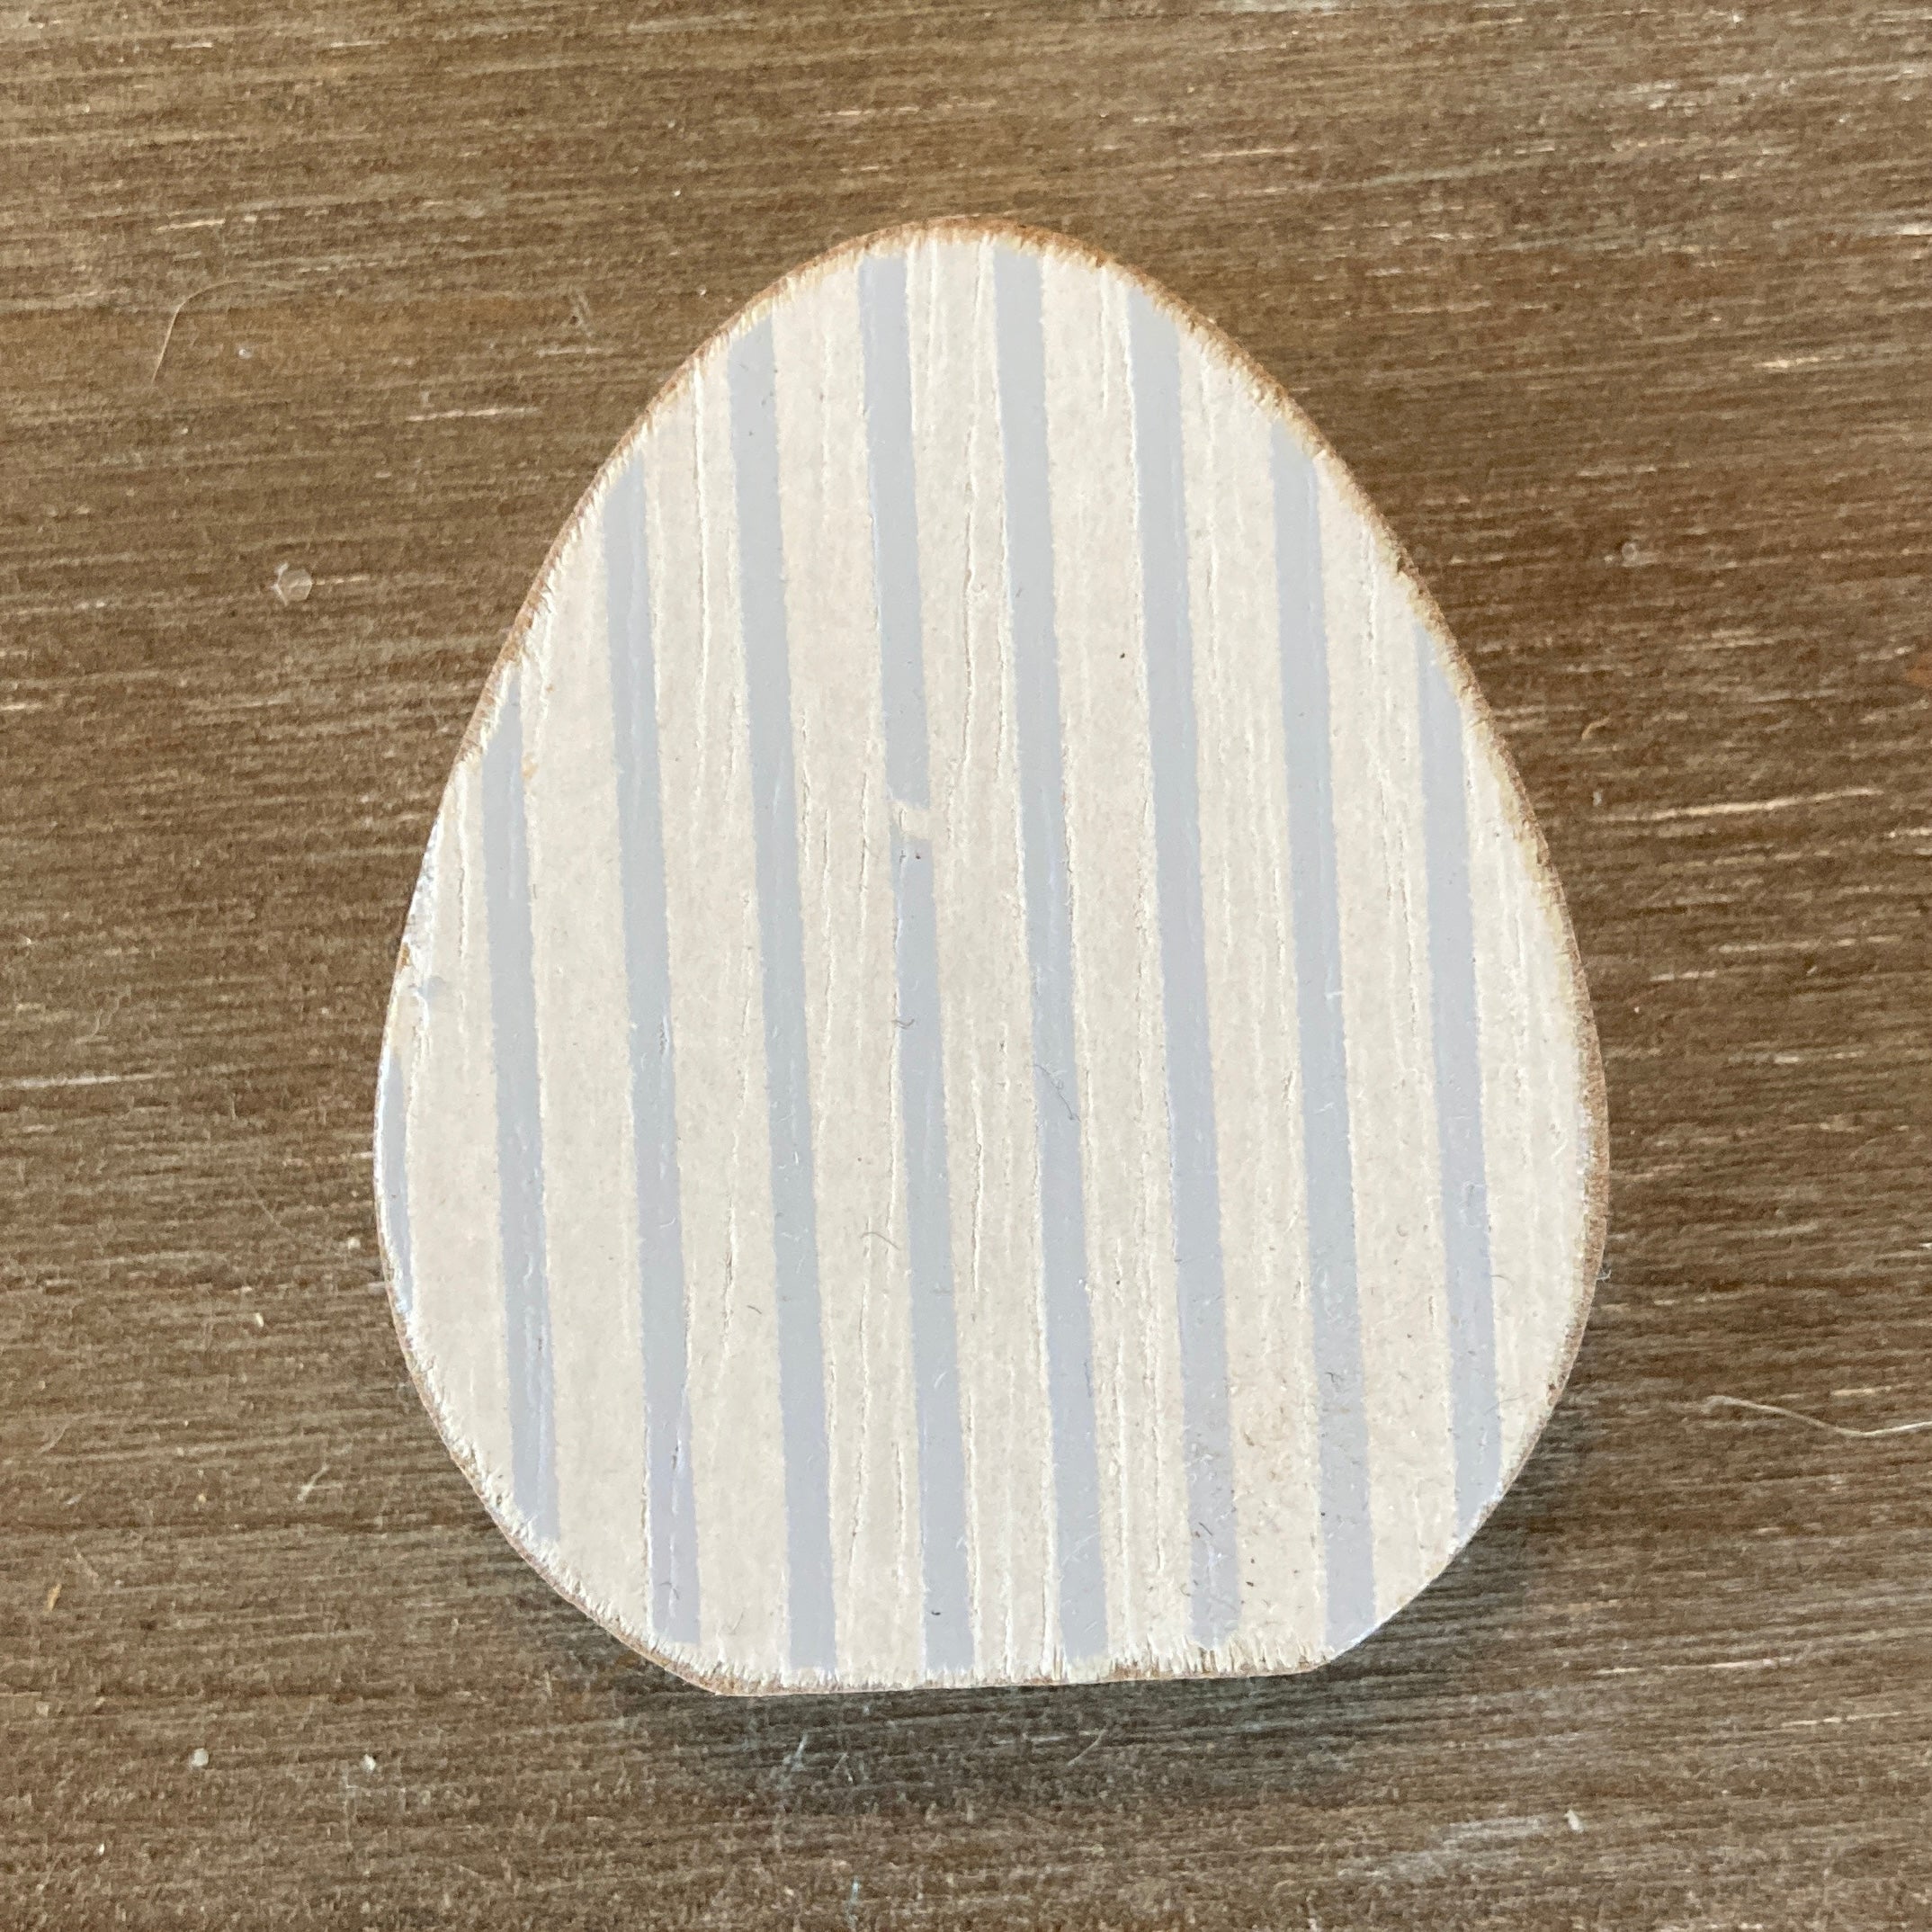 White and Blue striped egg Adams & Co Wooden Tile for Letterboard